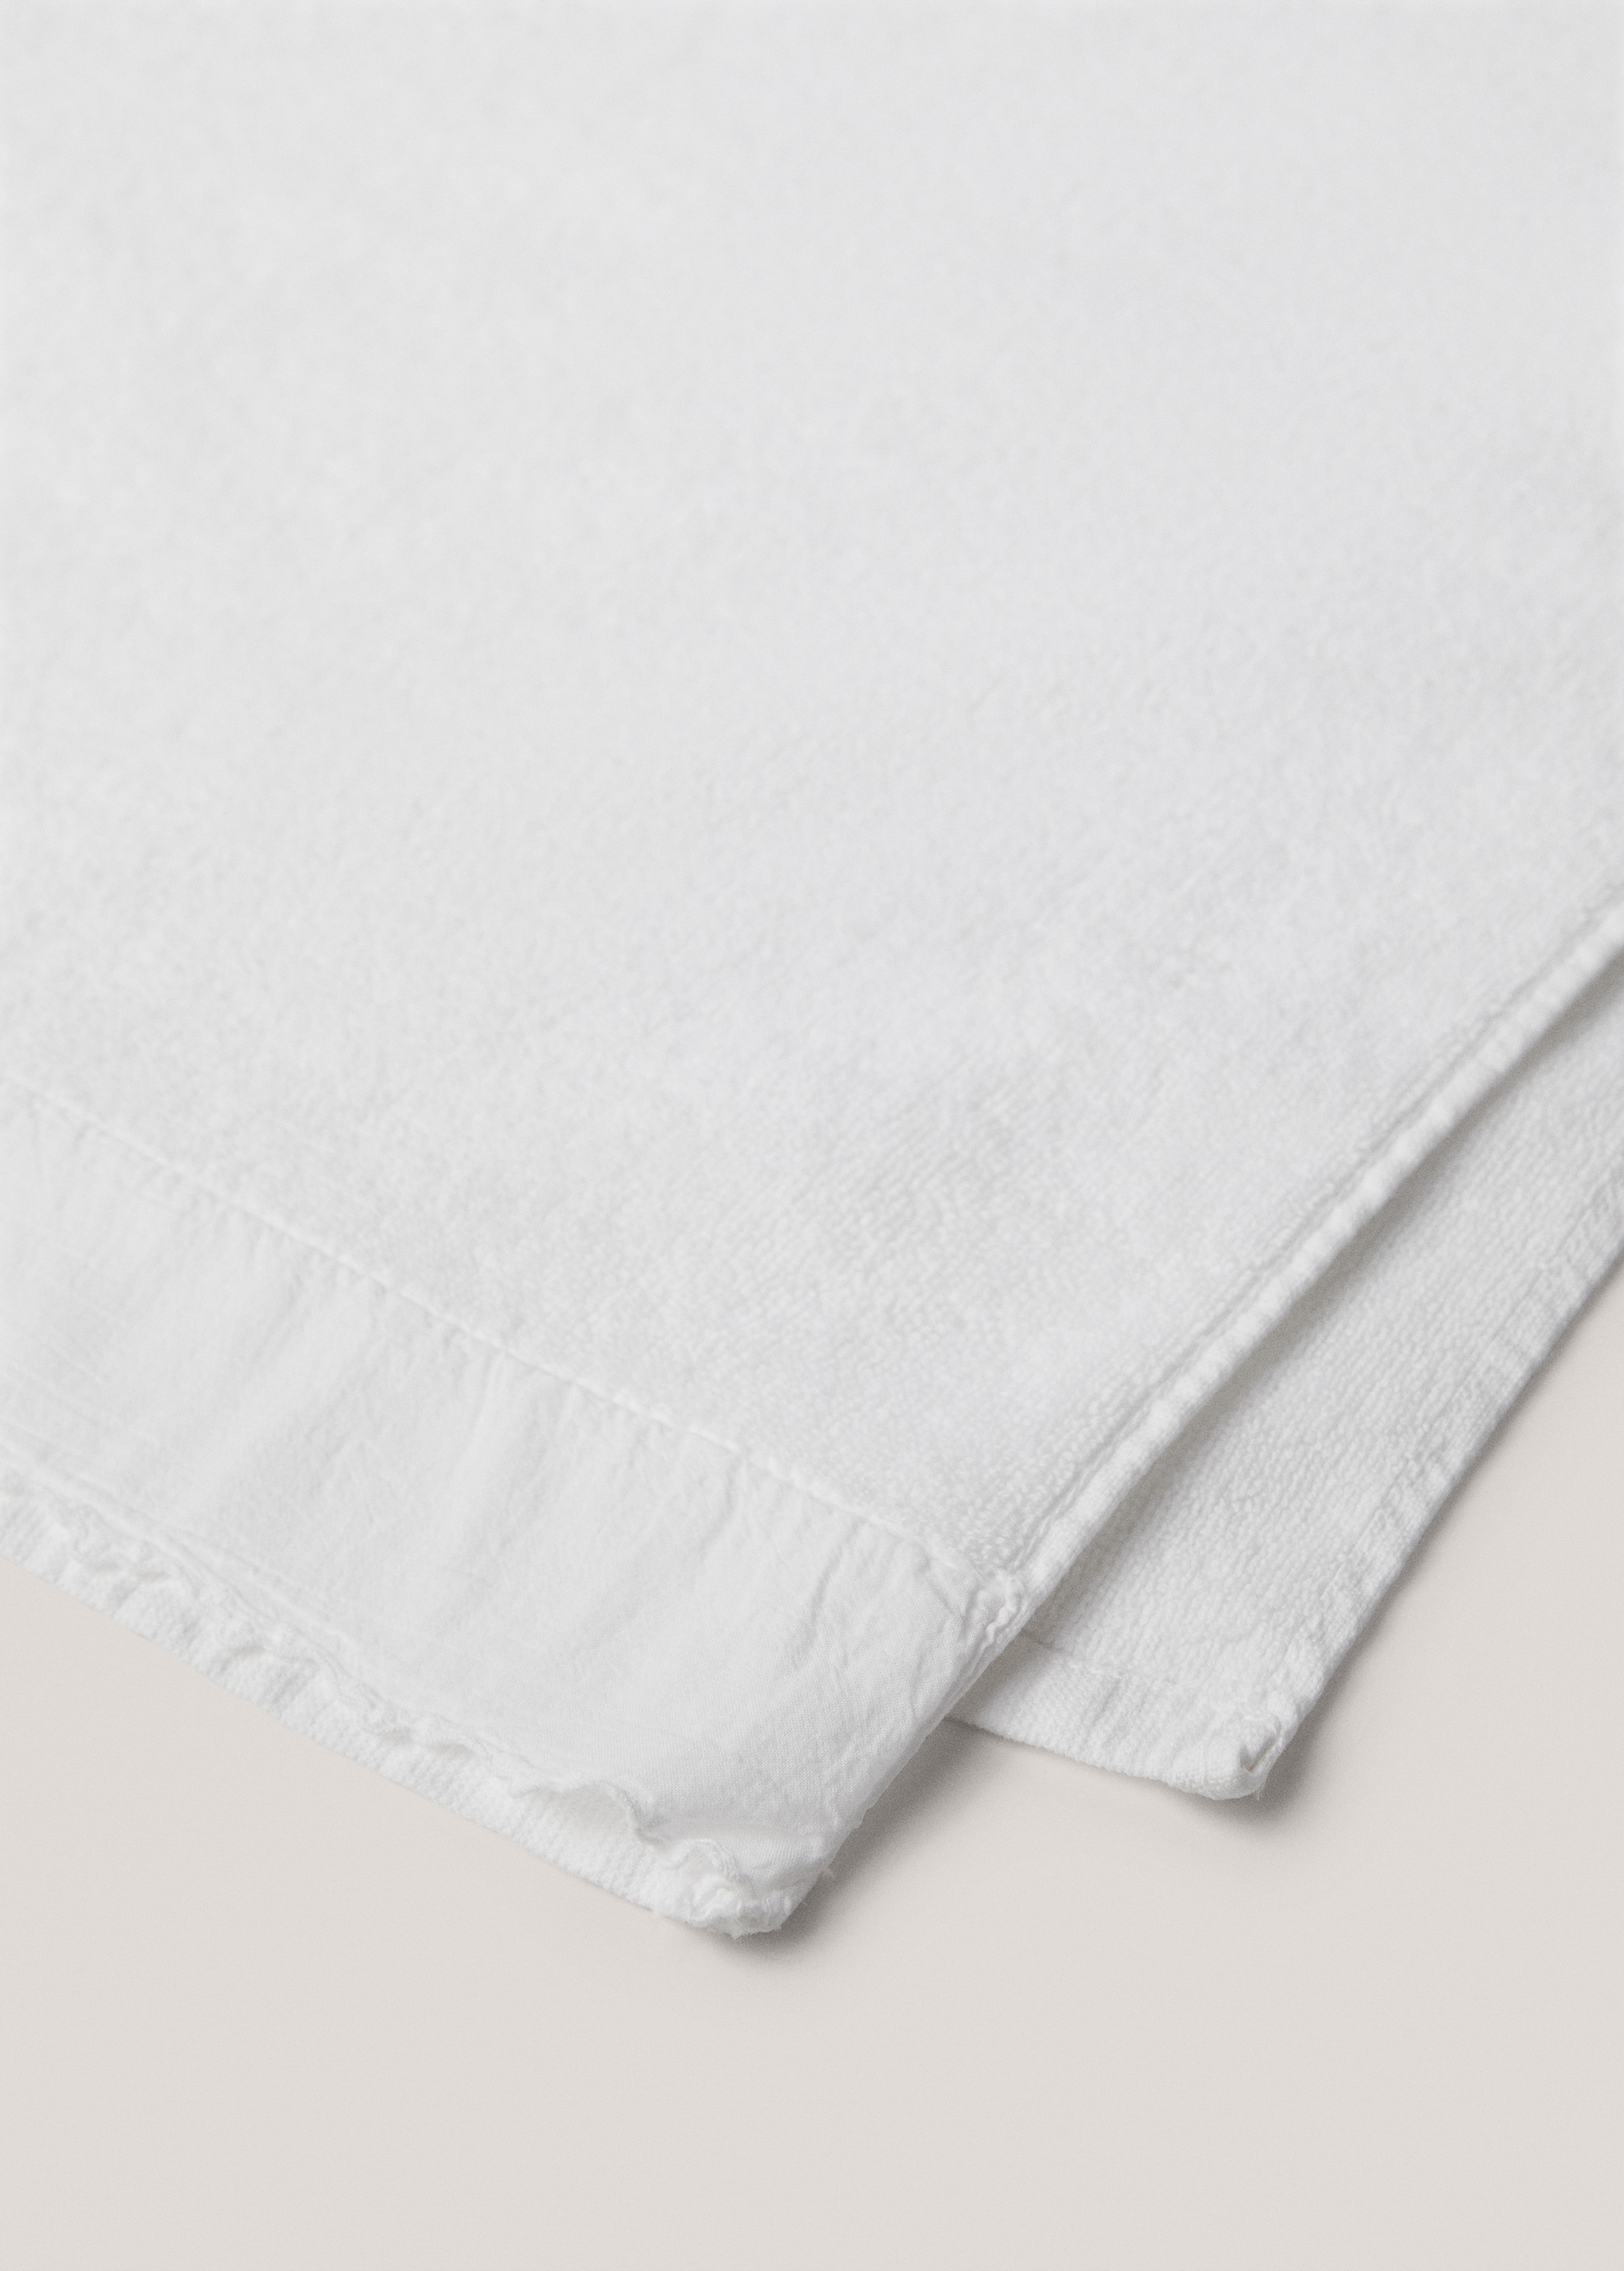 Cotton bath towel 35x60 in - Details of the article 2